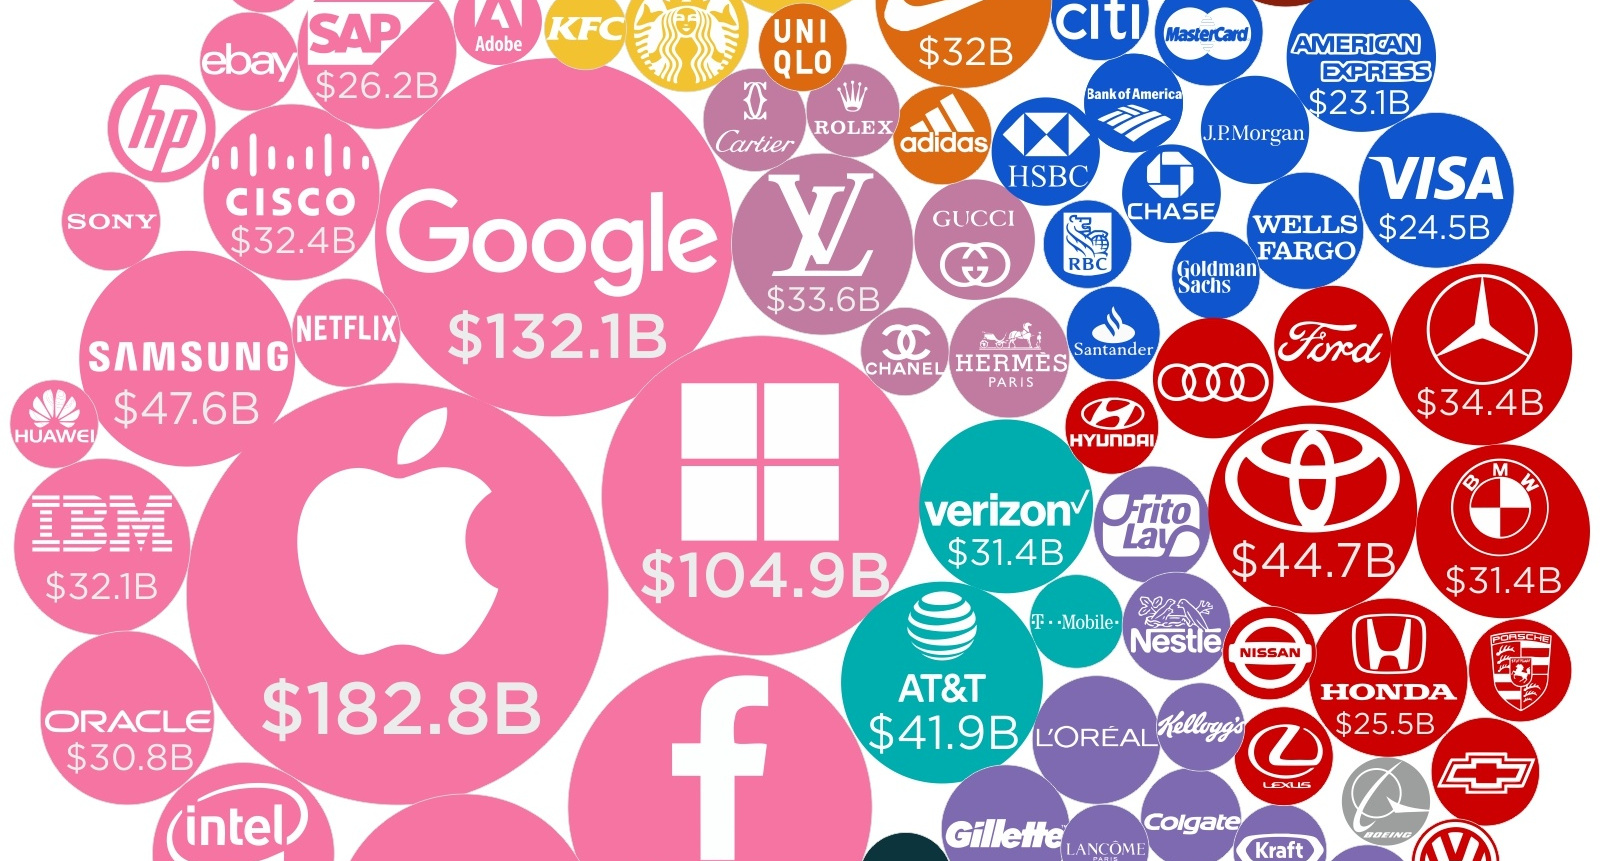 Infographic The World's 100 Most Valuable Brands in 2018